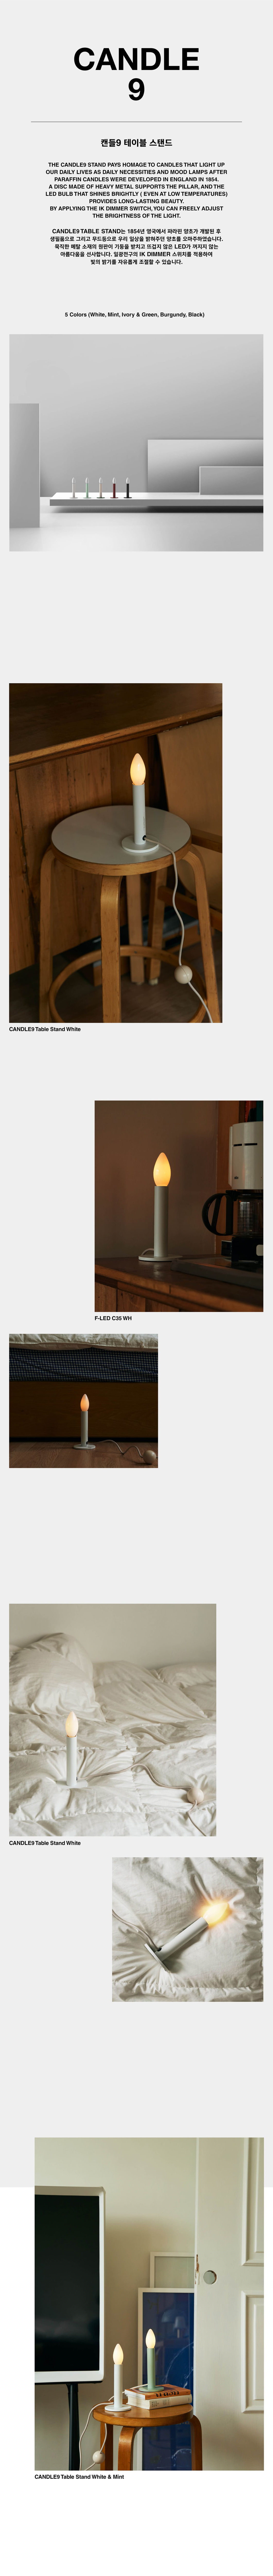 CANDLE9TableStand_01_213328.jpg